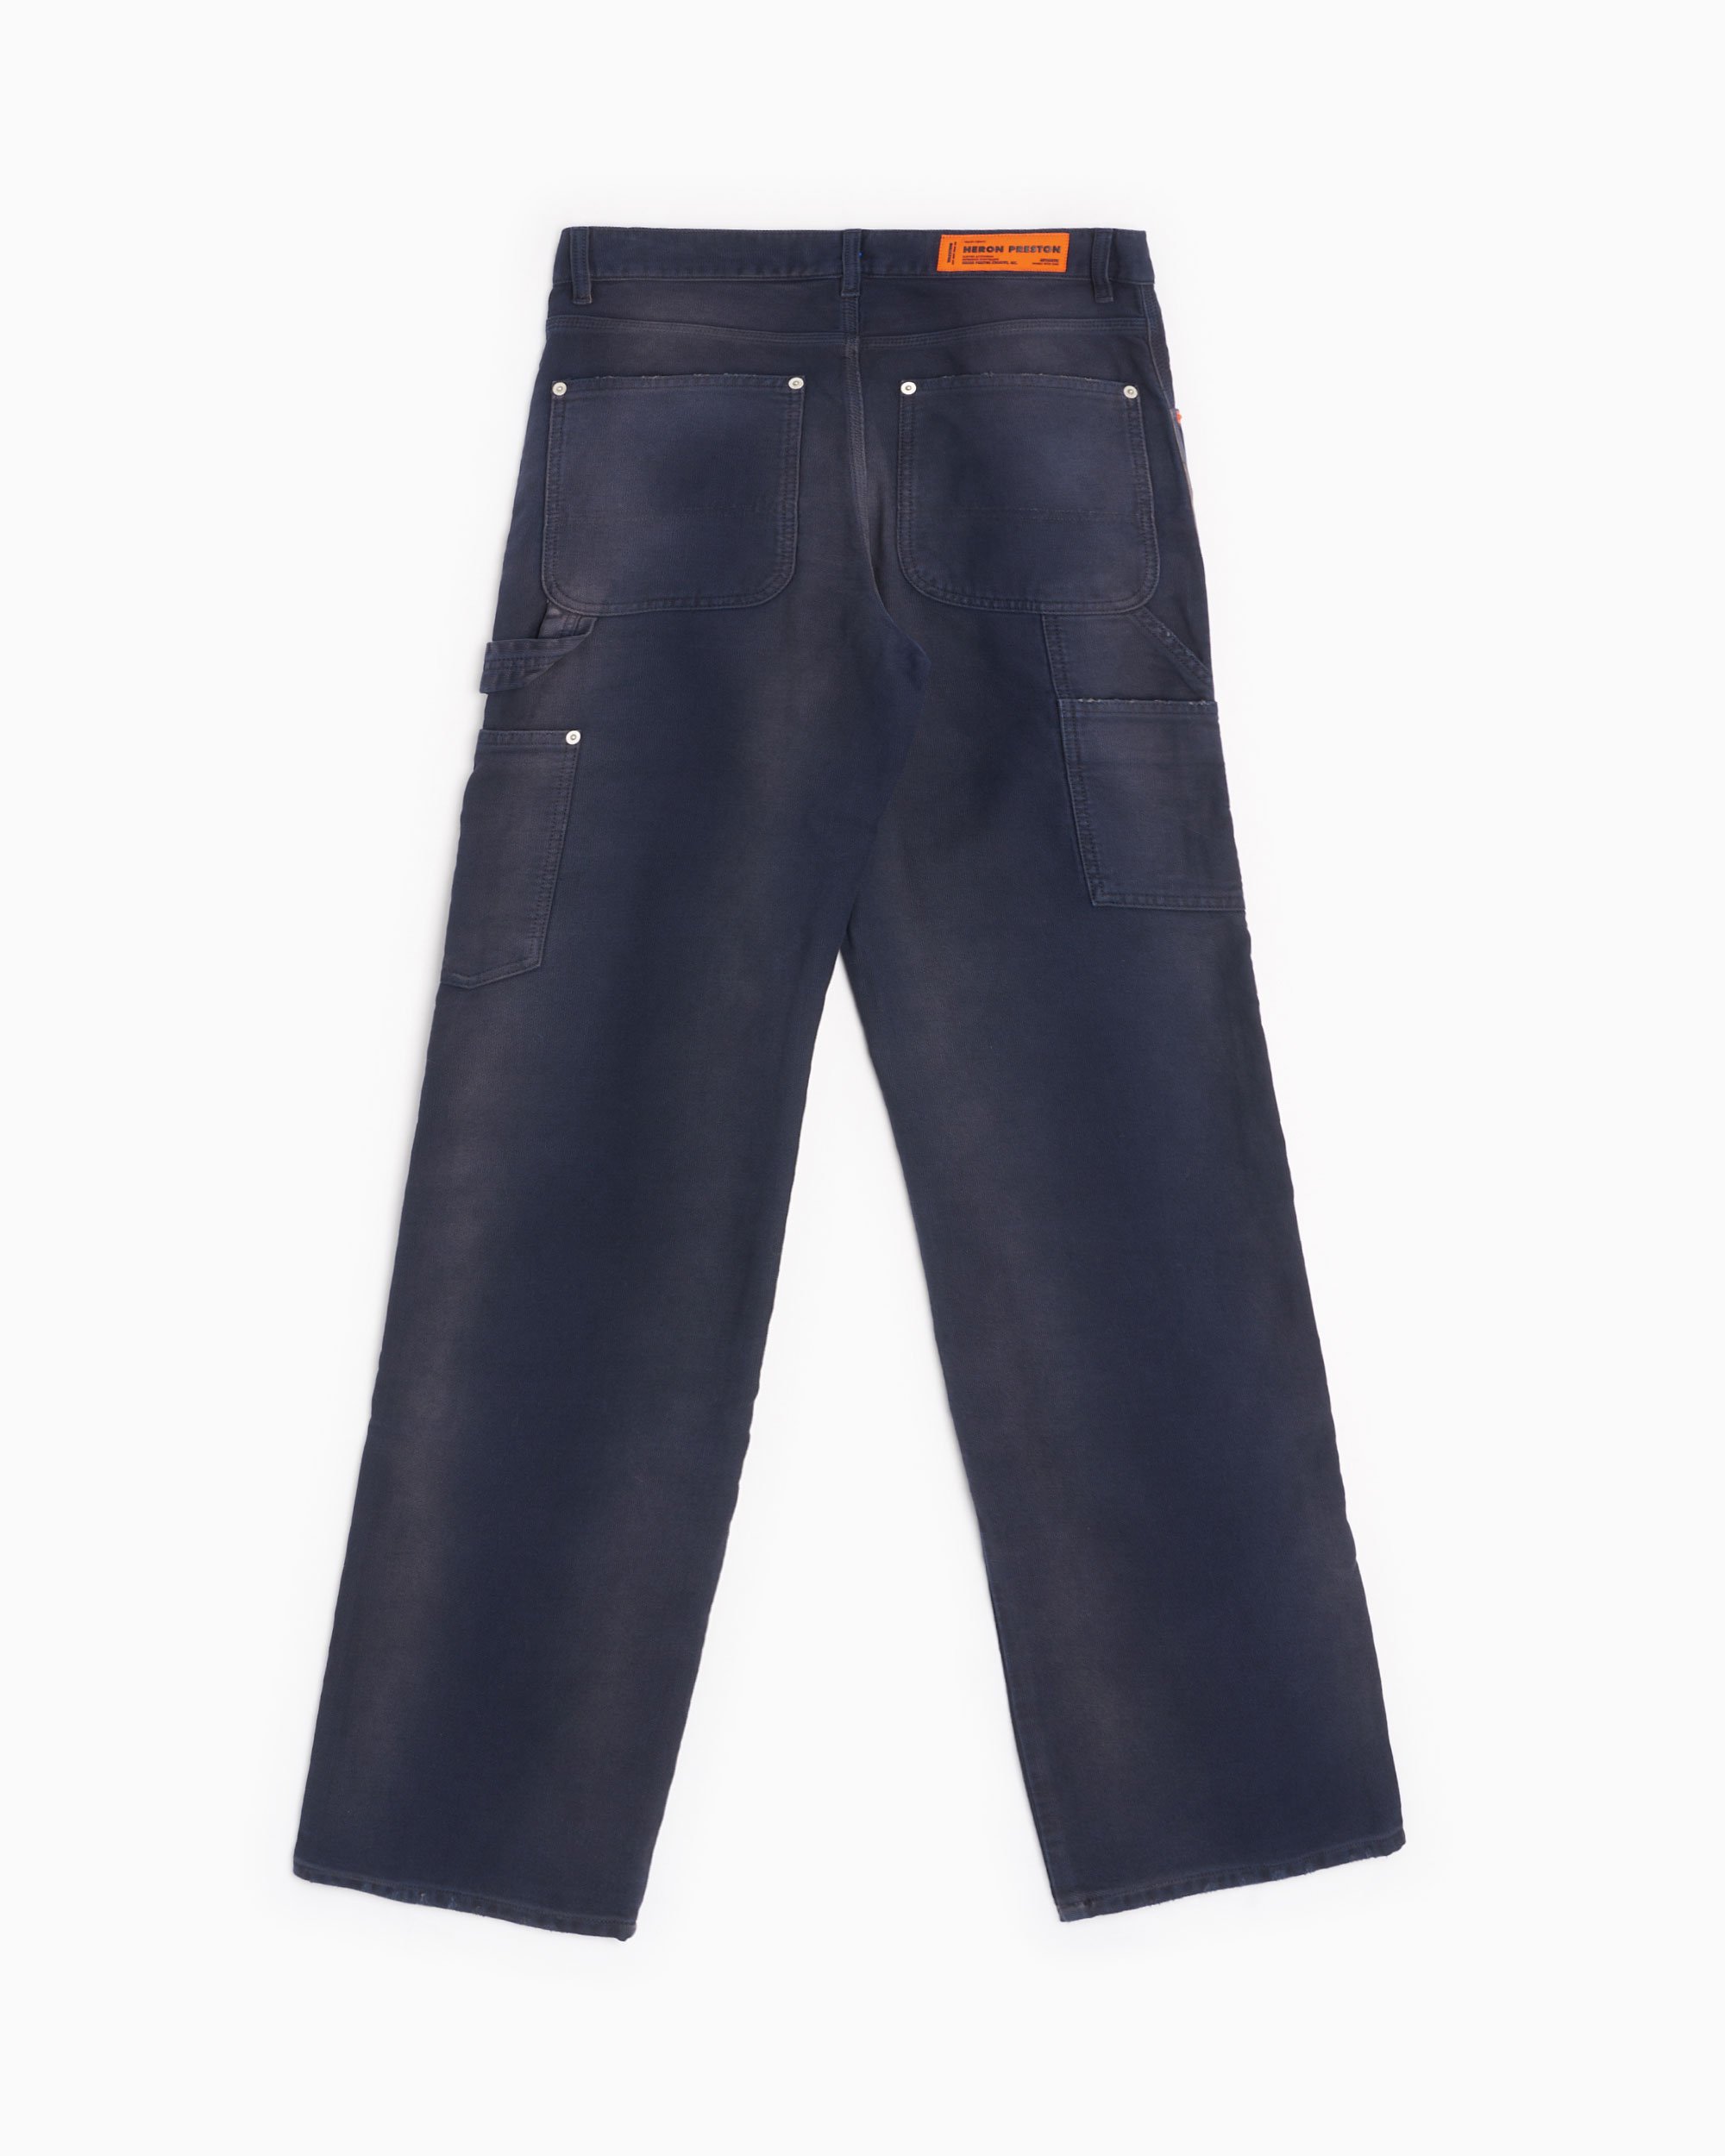 Dickies Men's Relaxed-Fit Carpenter Jean | Jeans outfit men, Guys clothing  styles, Pants outfit men